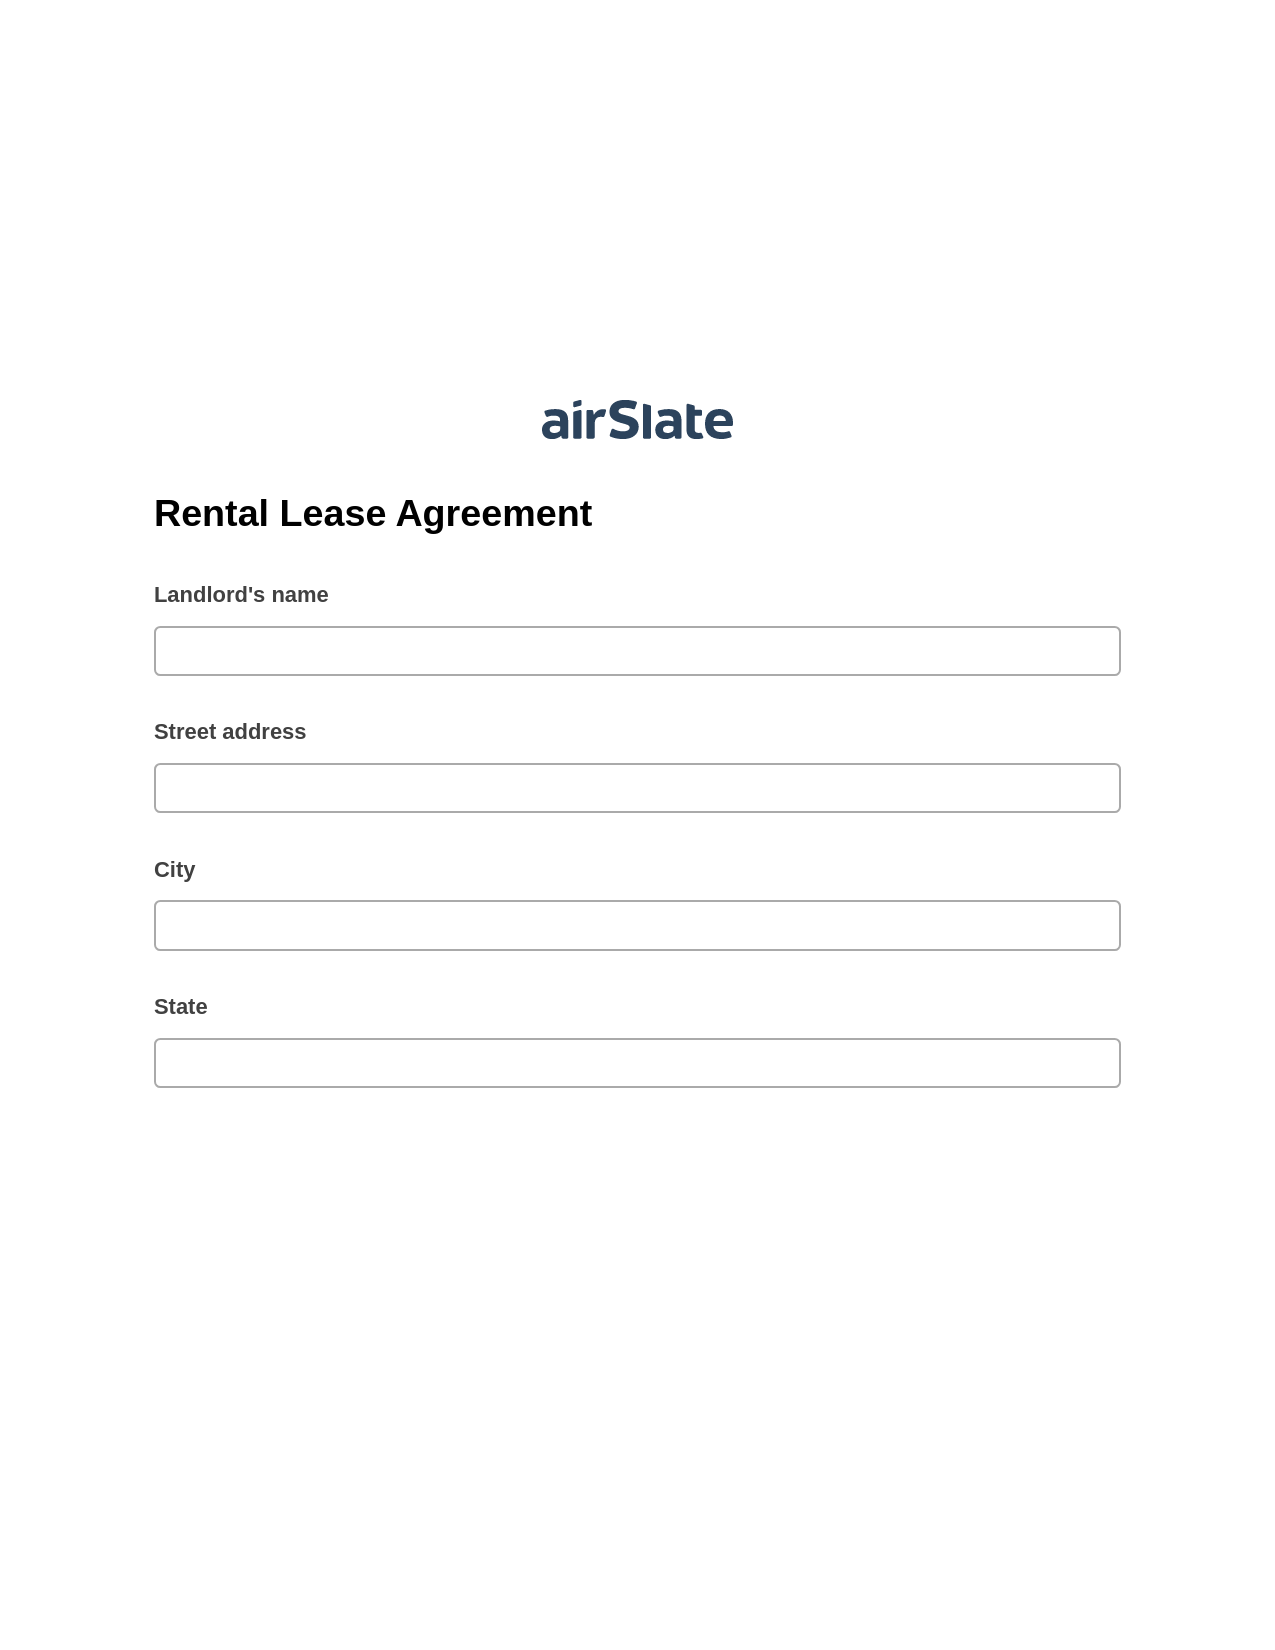 Rental Lease Agreement Pre-fill Slate from MS Dynamics 365 Records Bot, Audit Trail Bot, Box Bot